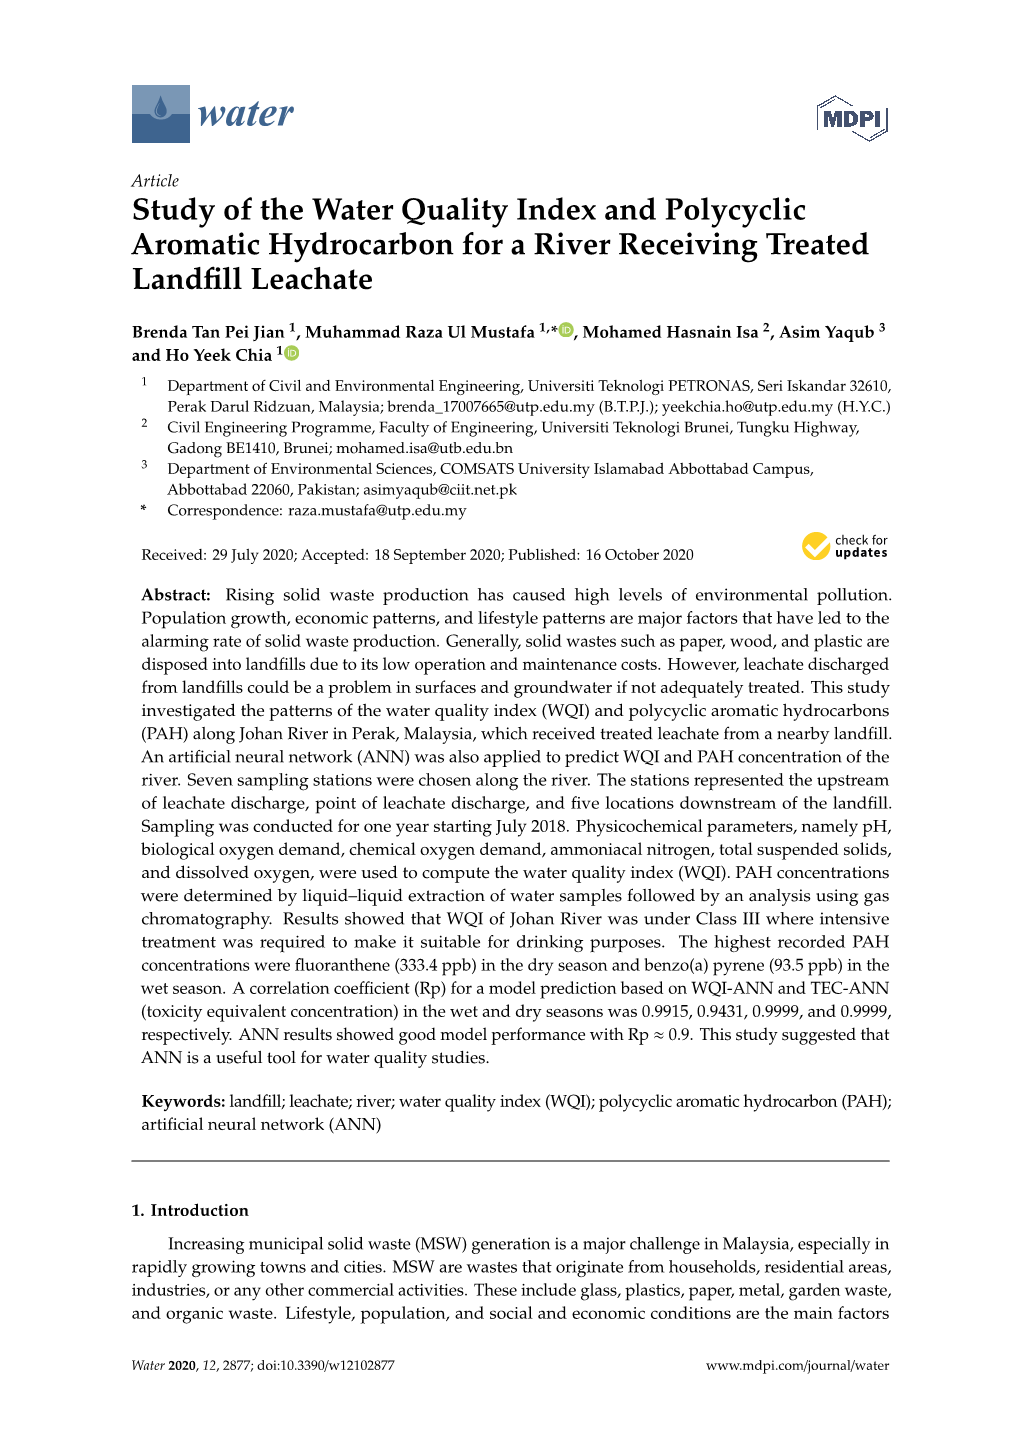 Study of the Water Quality Index and Polycyclic Aromatic Hydrocarbon for a River Receiving Treated Landﬁll Leachate